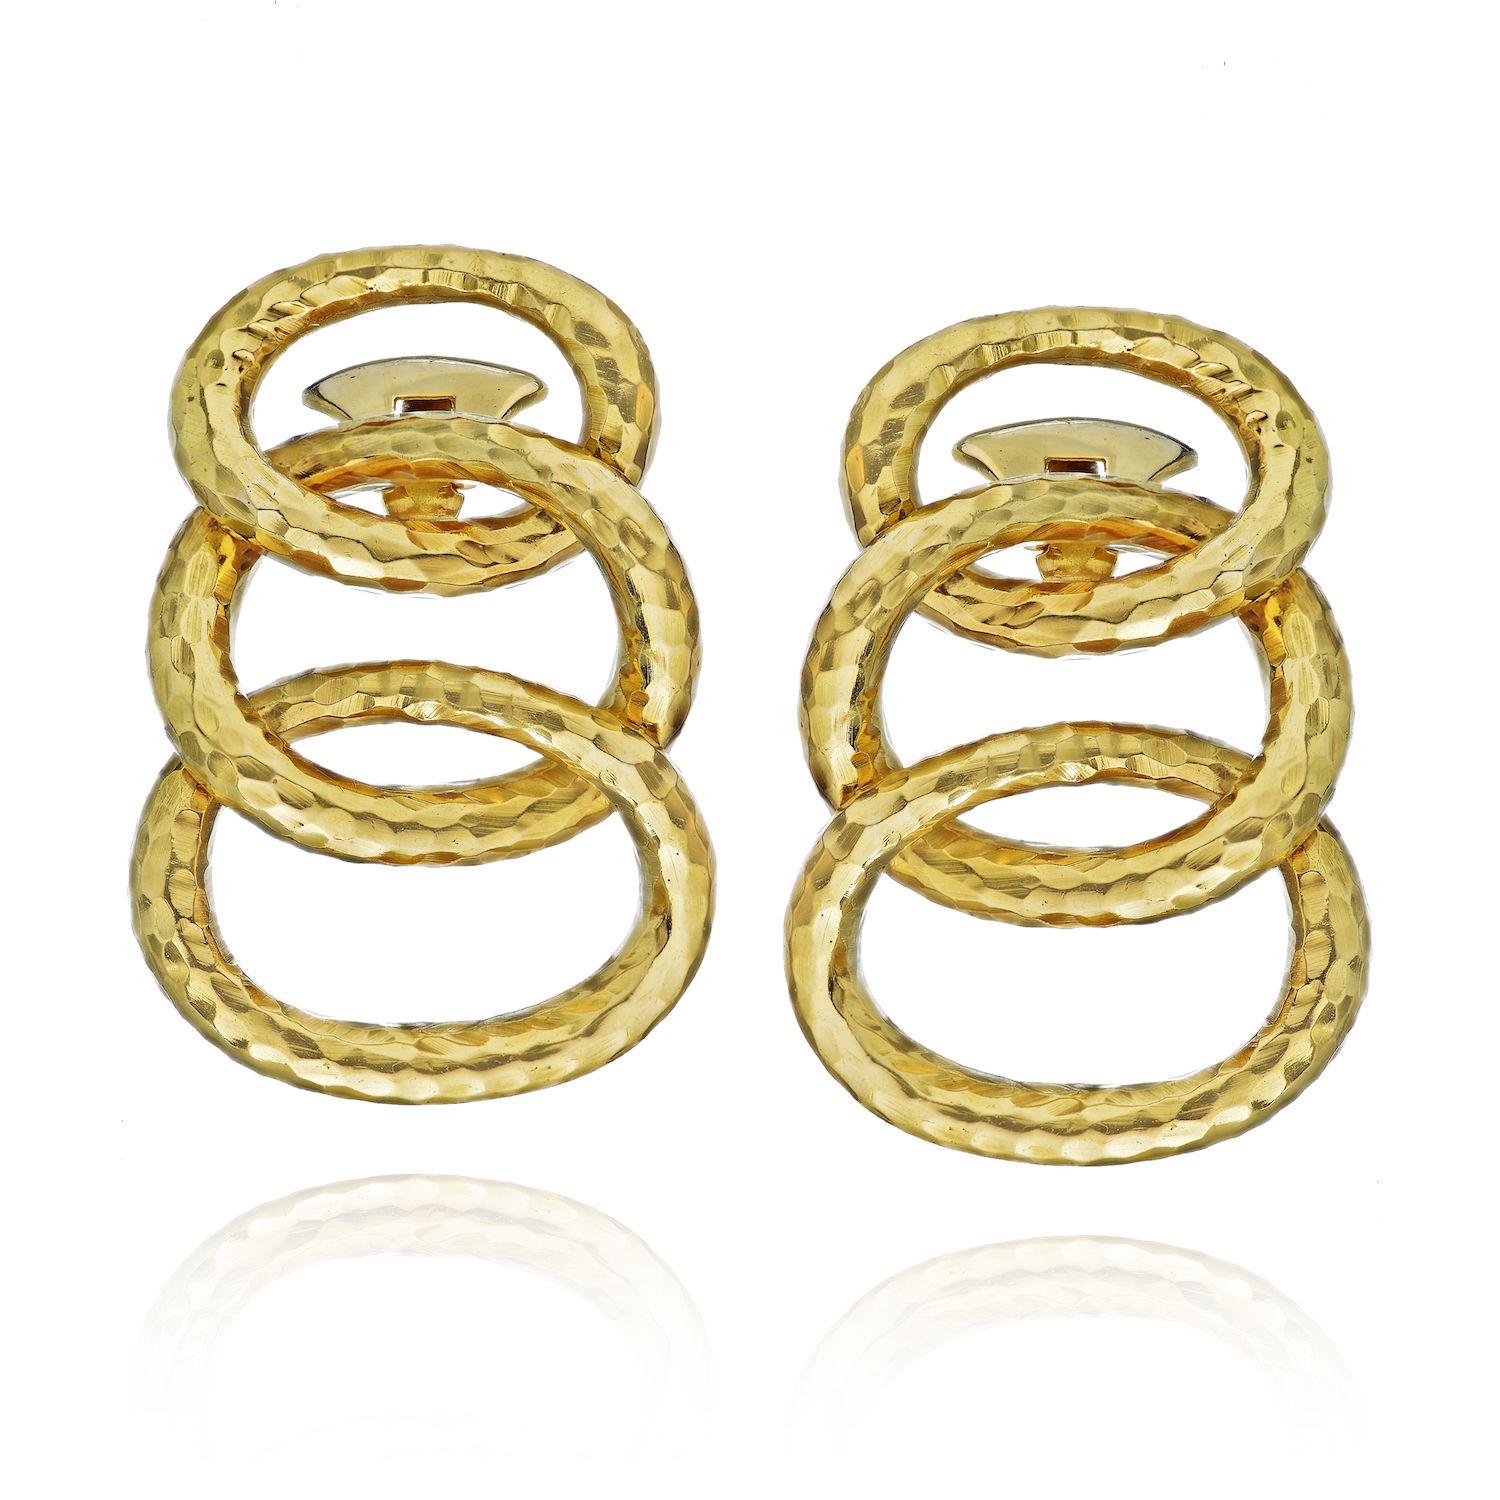 David Webb Yellow Gold Hammered Triple Hoop Earrings

Circa 2000 David Webb 18K Yellow Gold Triple Hoop Earrings with a Hand Hammered Finish. Measuring 1 5/8 inches in length and 1 1/8 inch wide. Each hoop is is individually attached for articulated